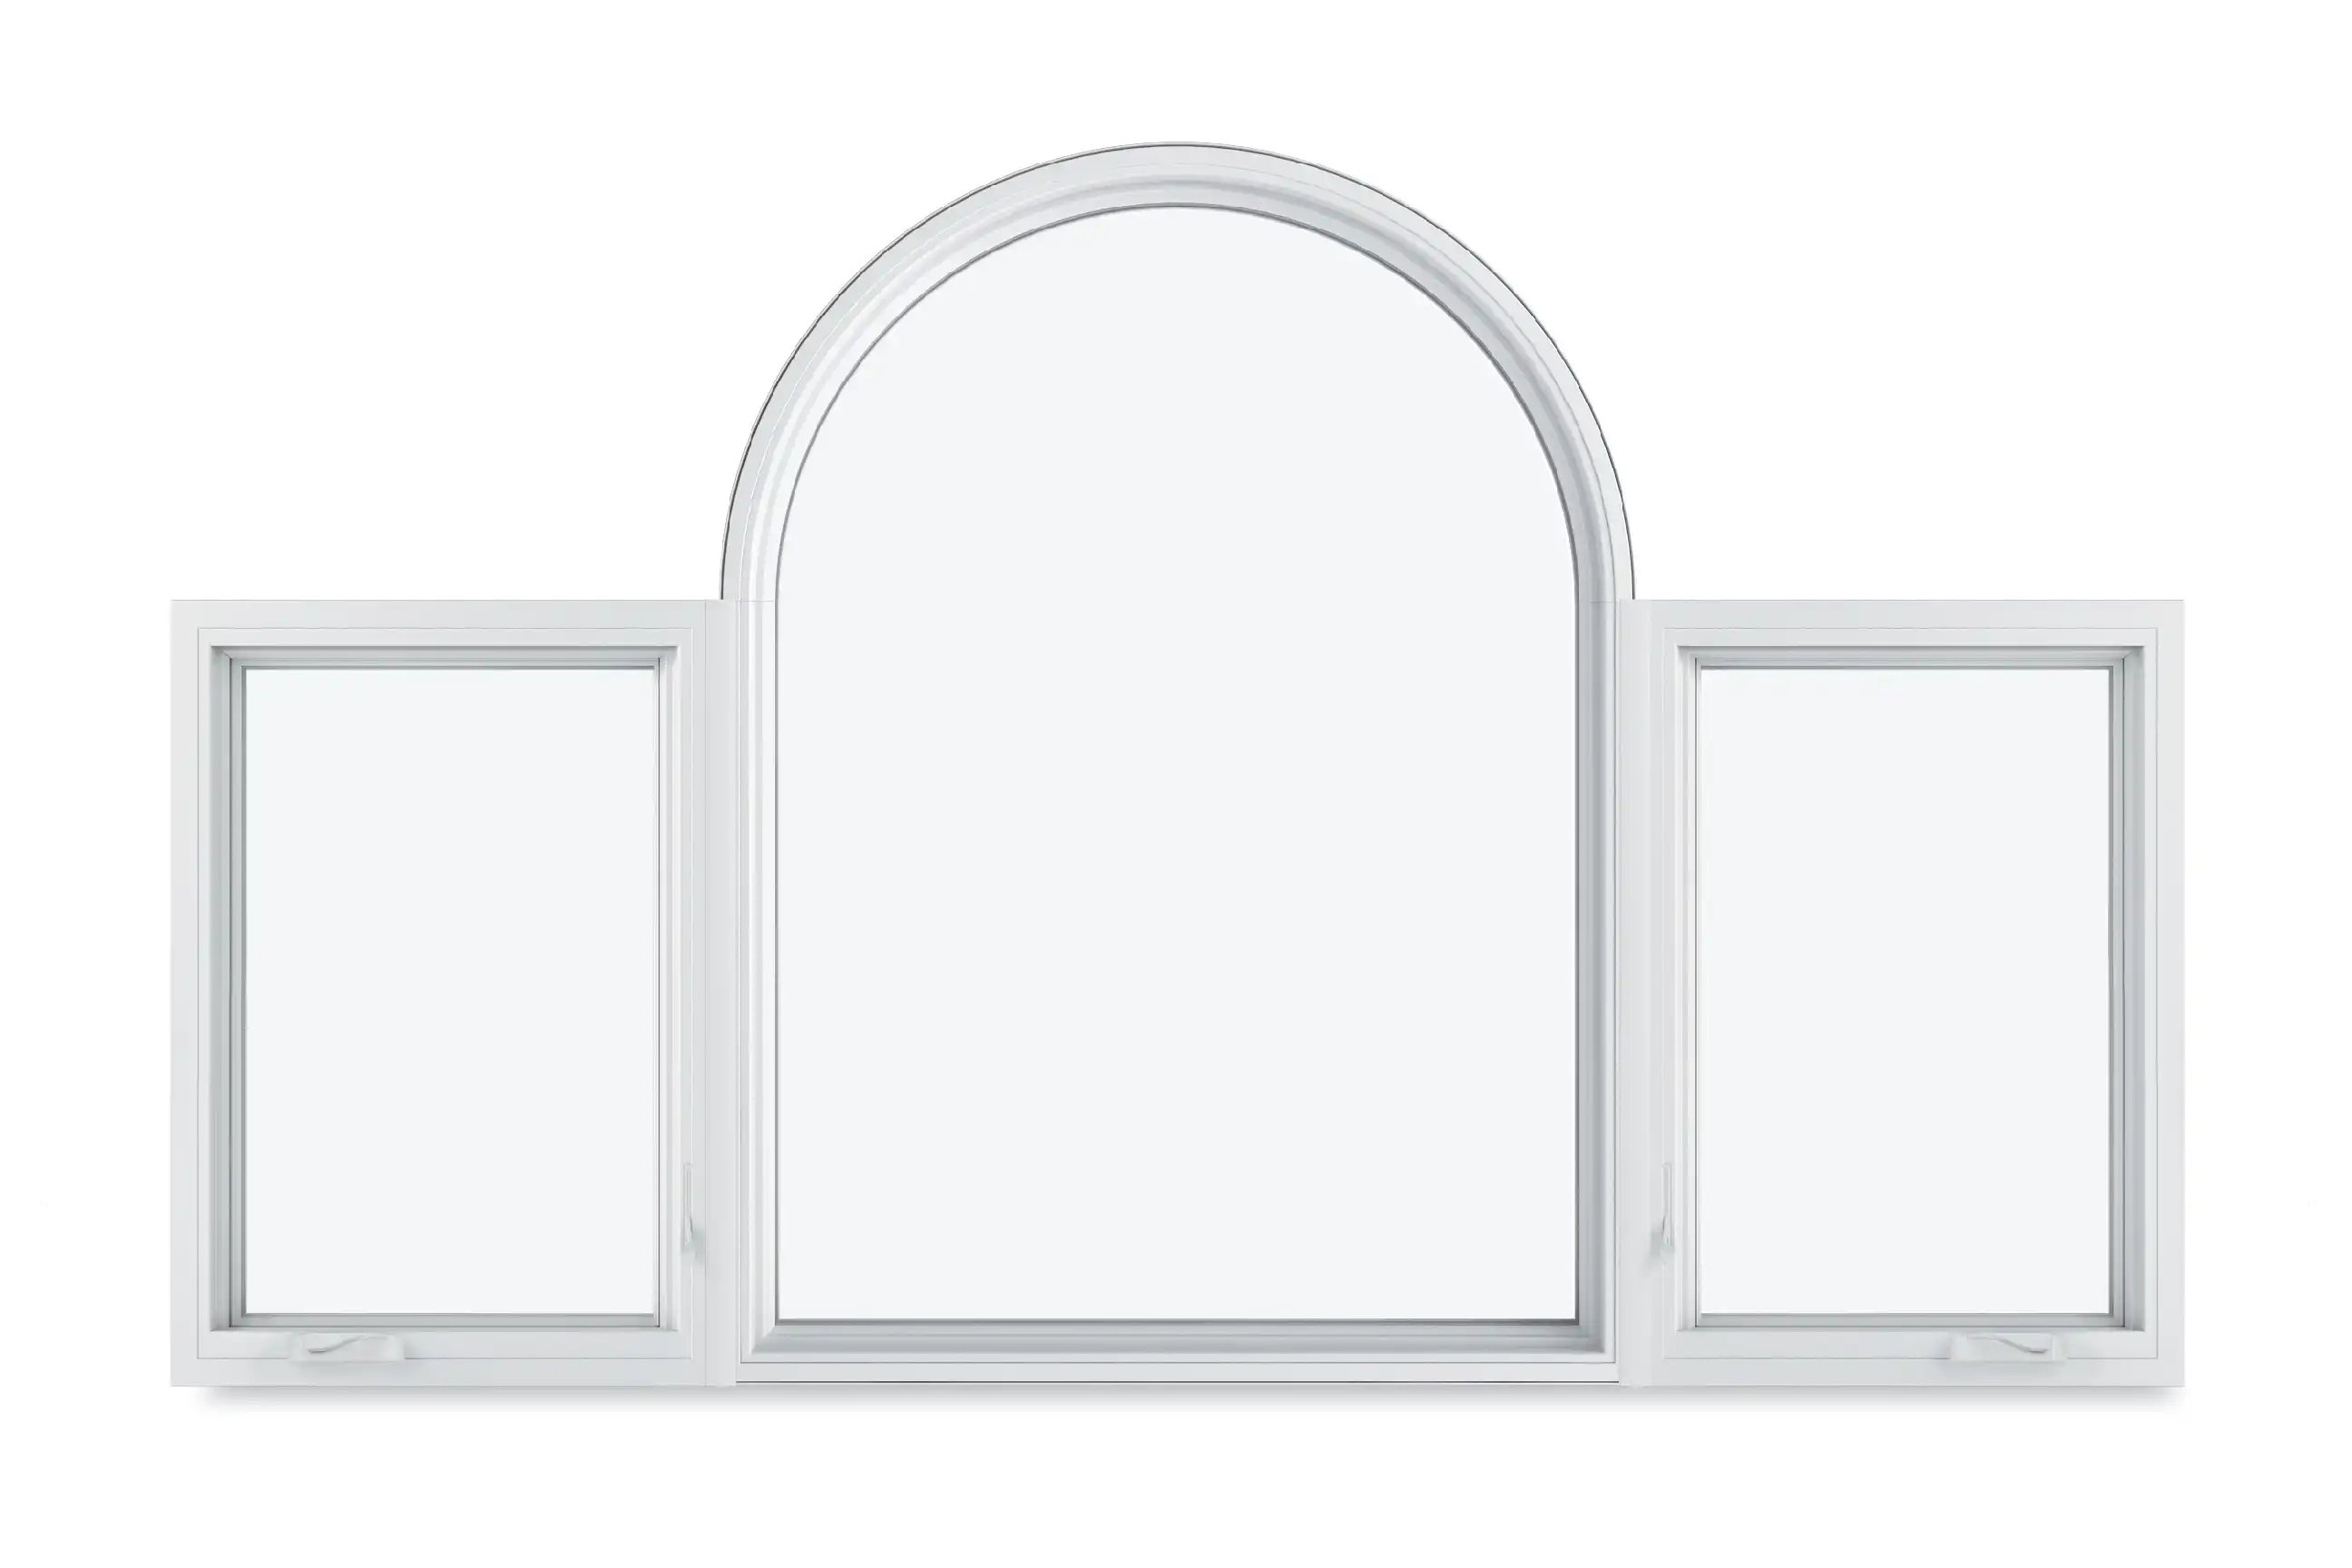 View of two white Marvin Replacement Casement windows with a white picture window in the middle.